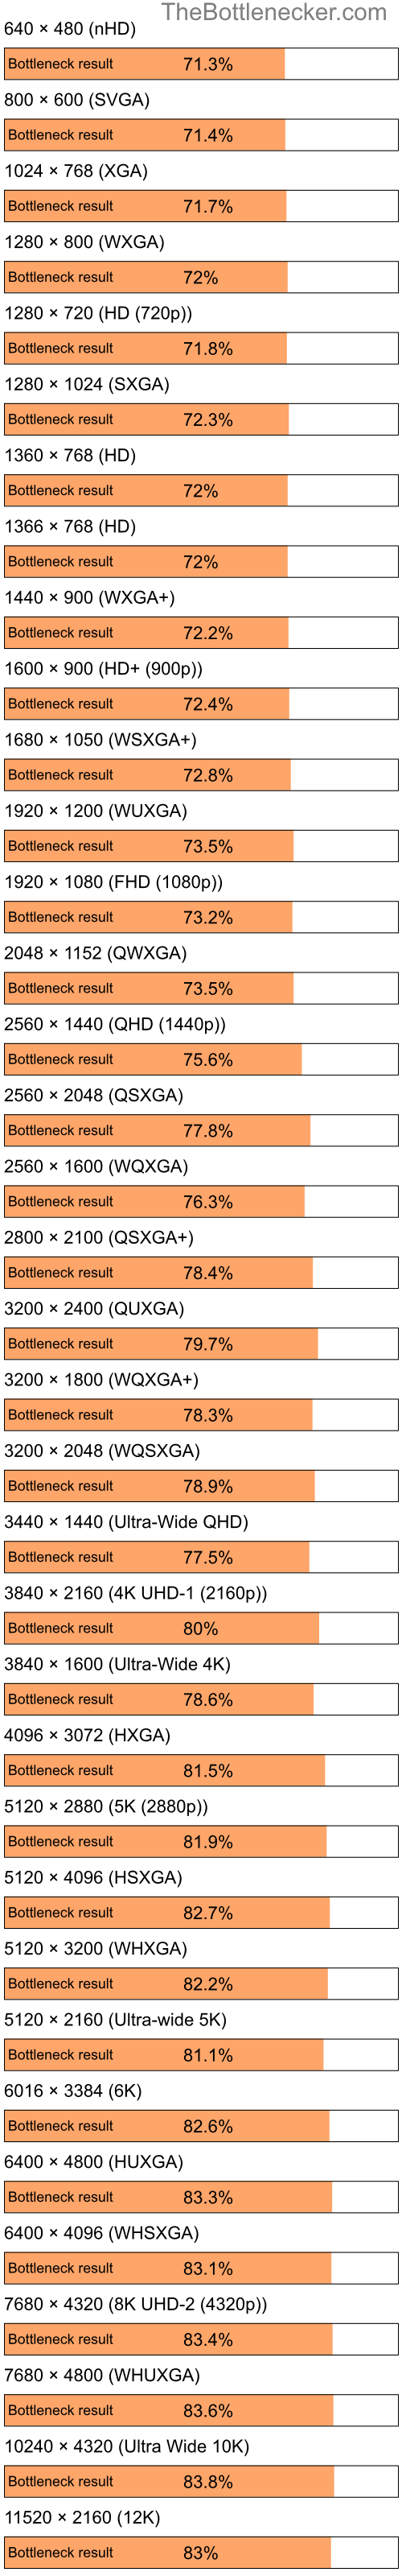 Bottleneck results by resolution for Intel Pentium 4 and AMD Radeon 9600 PRO Family in Processor Intense Tasks